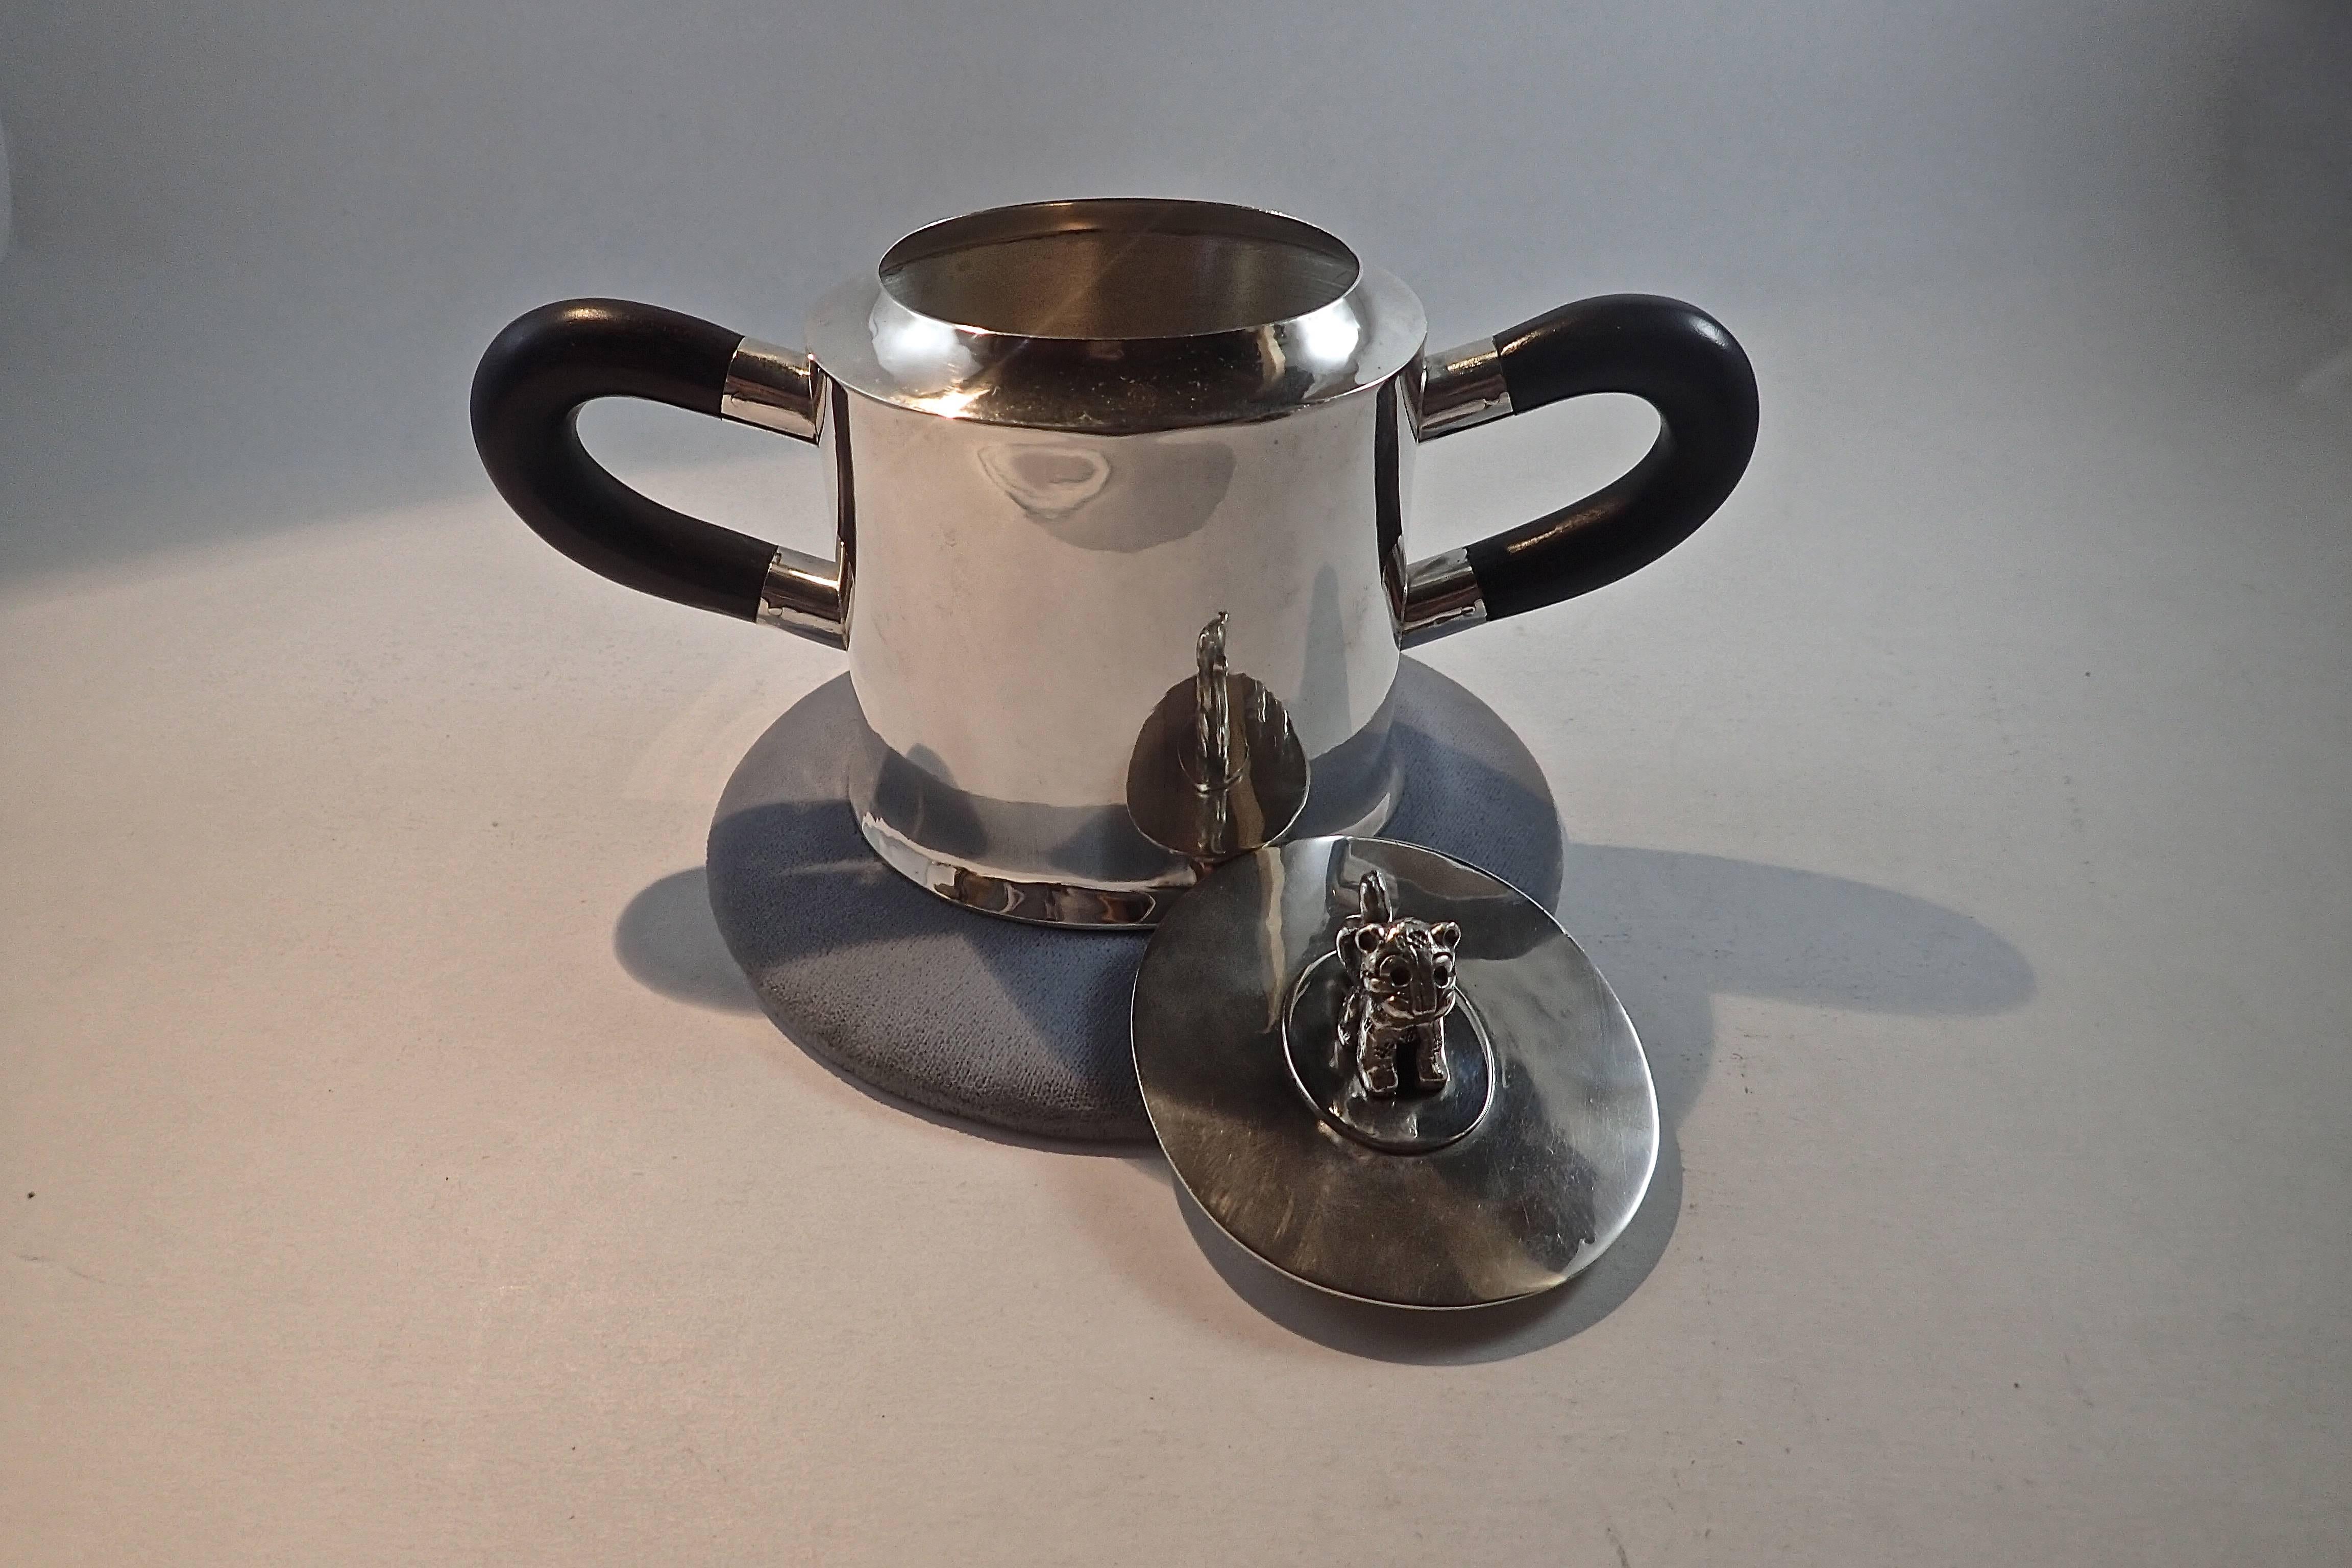 Five piece sterling silver tea set with finished ebony handles created by Spratling in Taxco, Mexico. Tray is not the original.

Covered Creamer: 3.5 x 5.75 inches
Sugar Bowl: 3.5 x 6.5 inches
Coffee Pot: 6 x 8 inches
Large Coffee Pot: 8 x 10.5